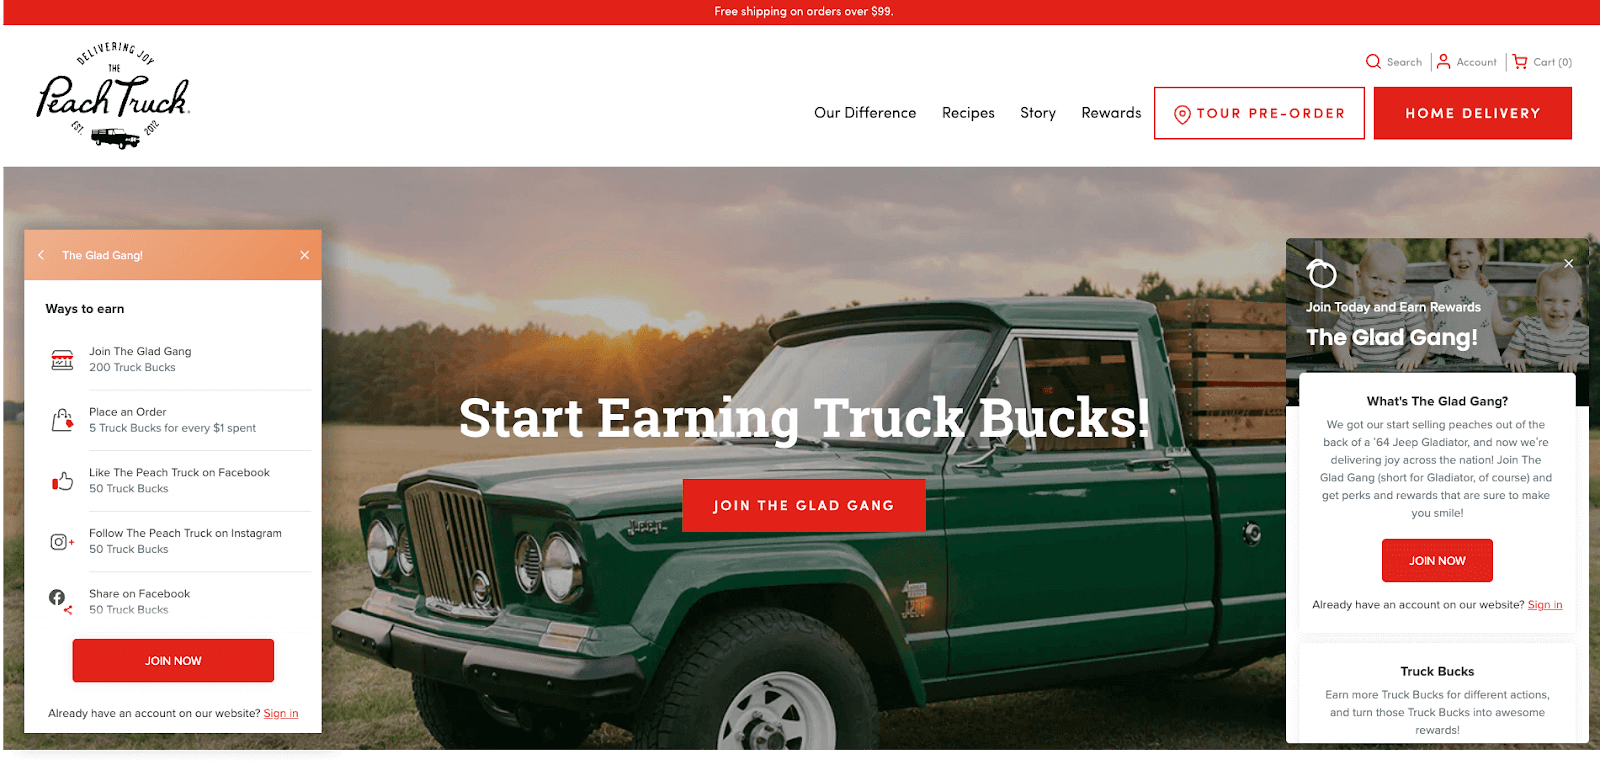 Creative Reward Points Names–A screenshot from The Peach Truck’s homepage showing screenshots from its rewards panel on both sides of the page. The rewards panel is titled, “Join today and earn rewards. The Glad Gang!”. The banner image shows a green ‘64 Jeep Gladiator truck, and the text on top says, “Start Earning Truck Bucks!”. There is a red button with white text that says, “Join the Glad Gang.”